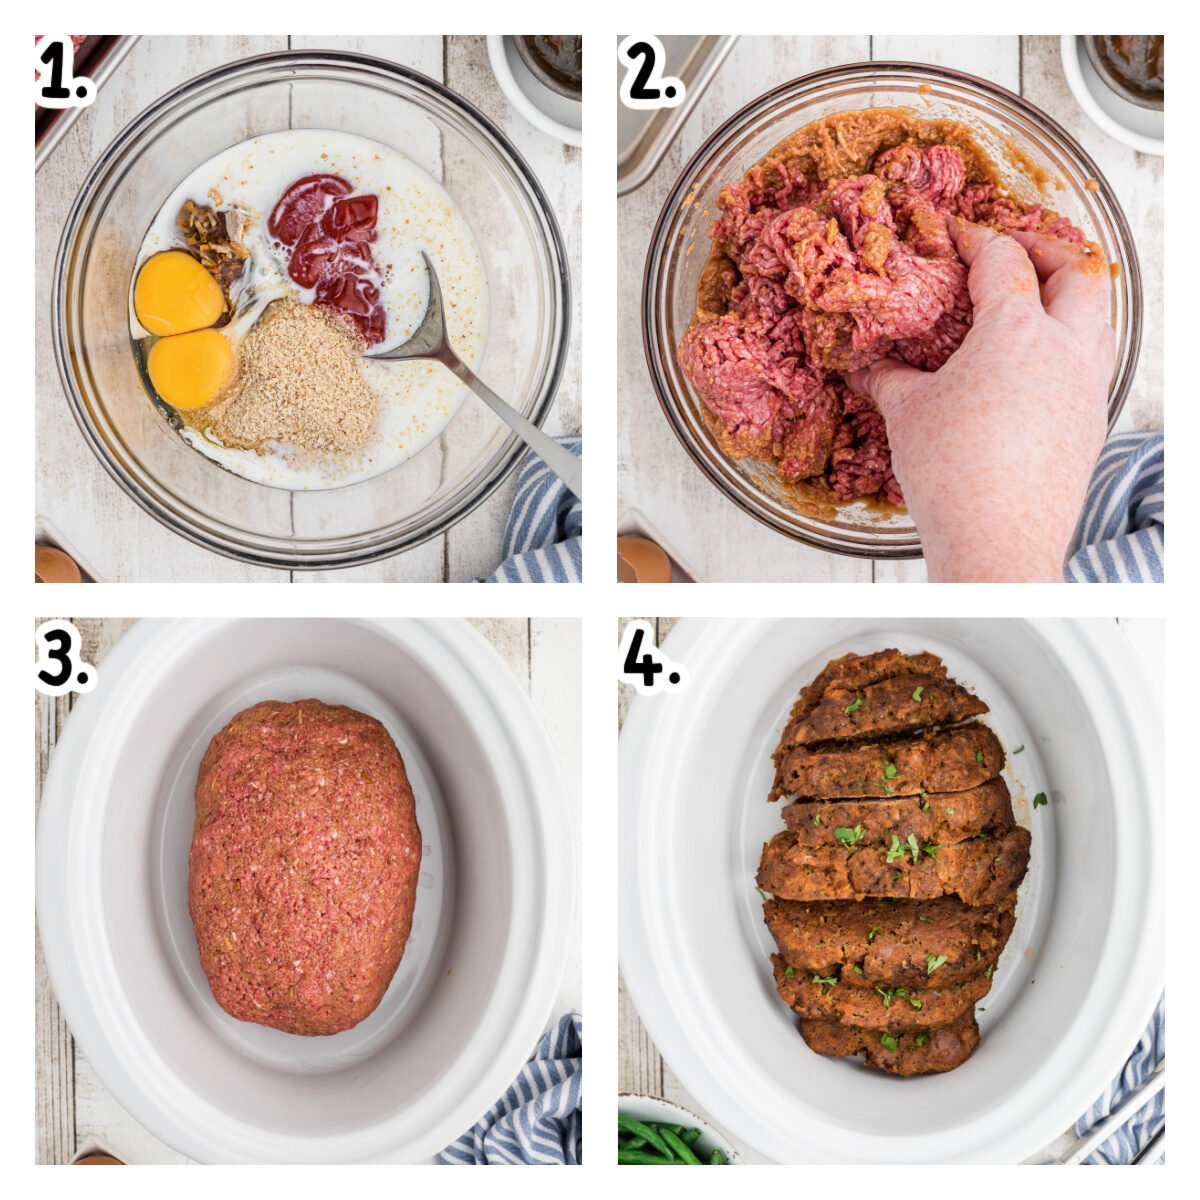 Four images showing how to assemble lipton onion meatloaf in a crockpot.